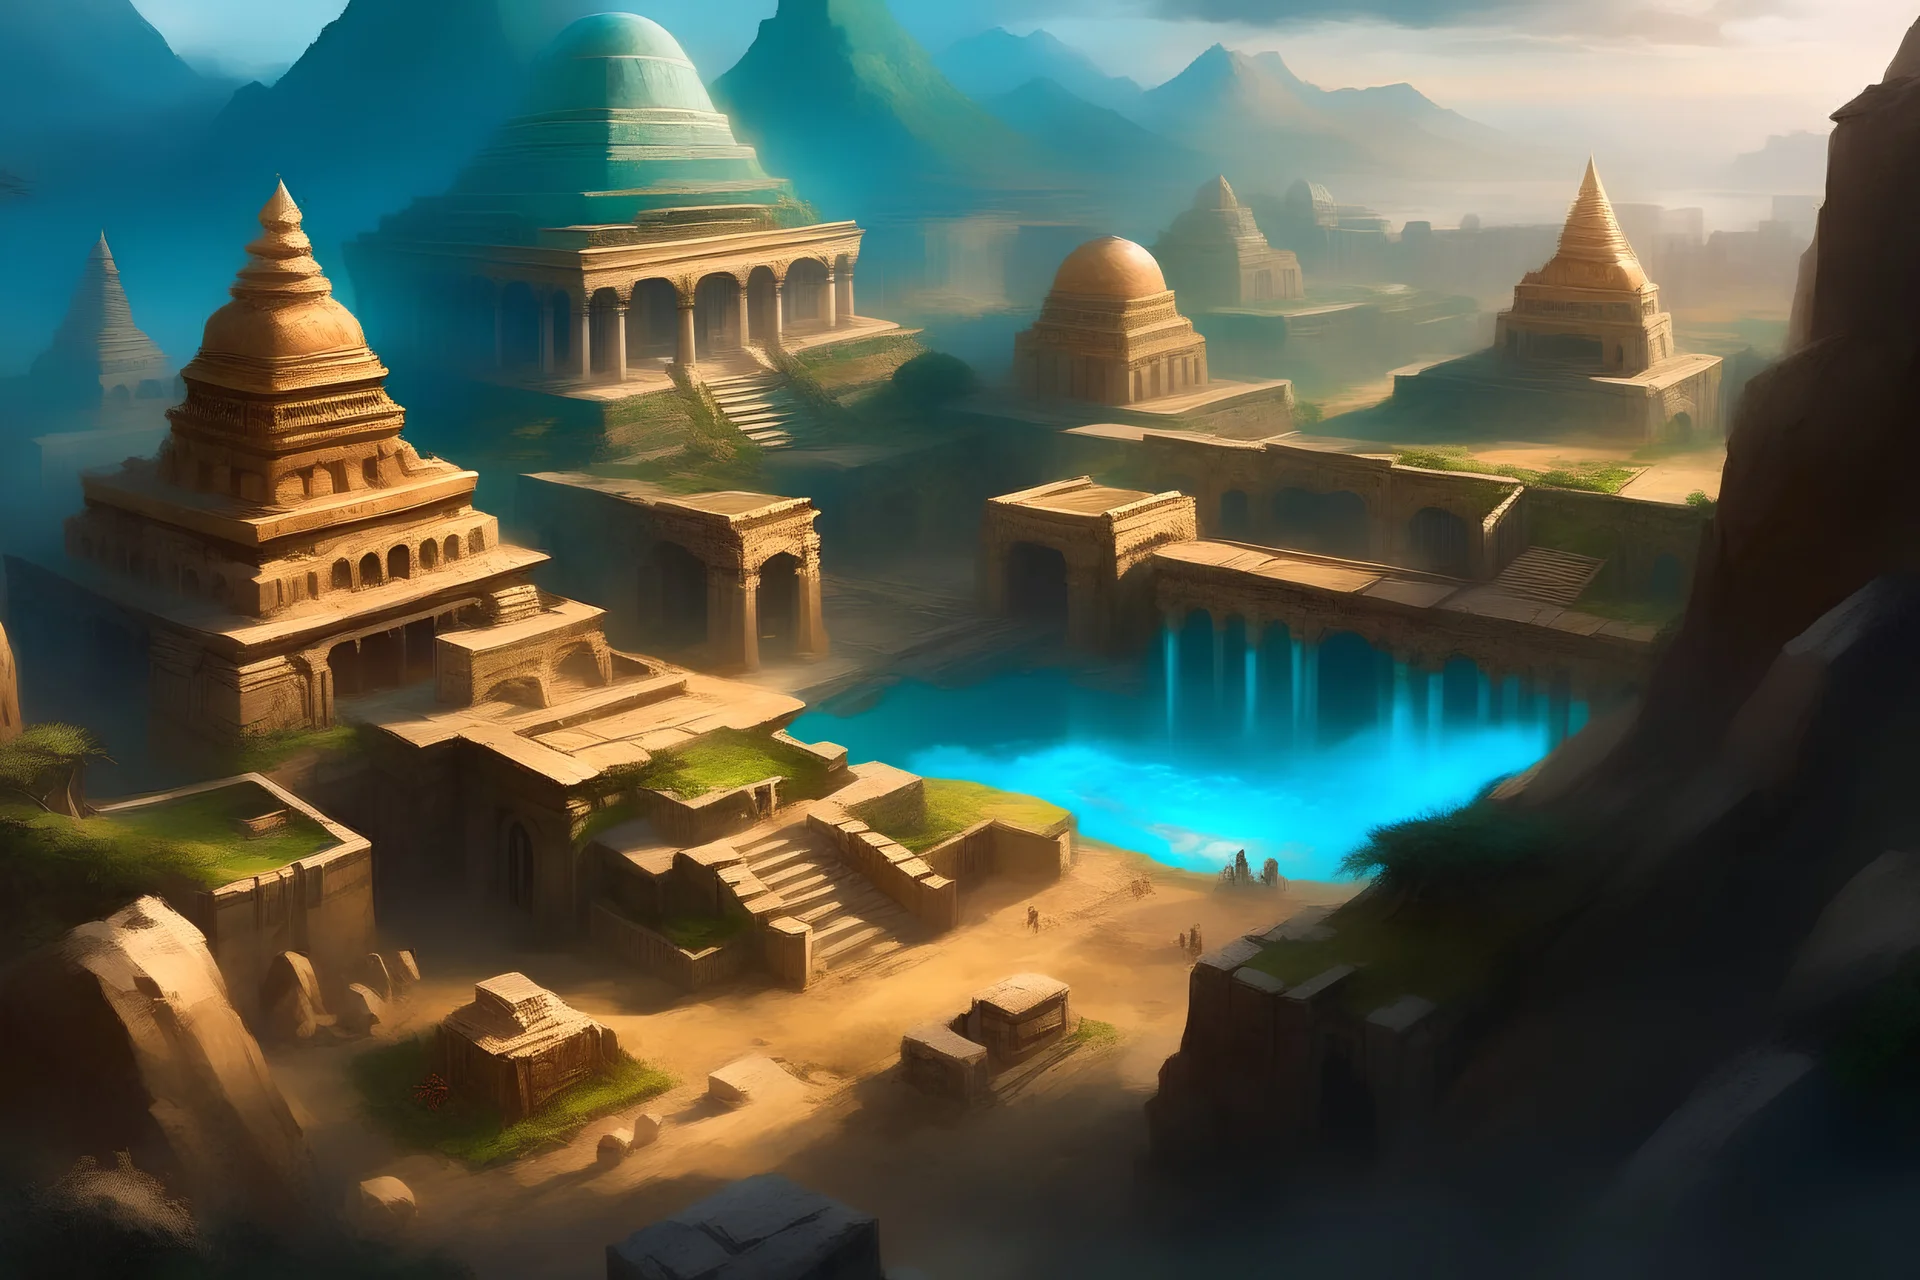 Lost Civilizations: Create an artwork that imagines the existence of an ancient, advanced civilization that has been hidden from history, waiting to be discovered. Brushstroke driven style of Impressionism with realistic subject matter